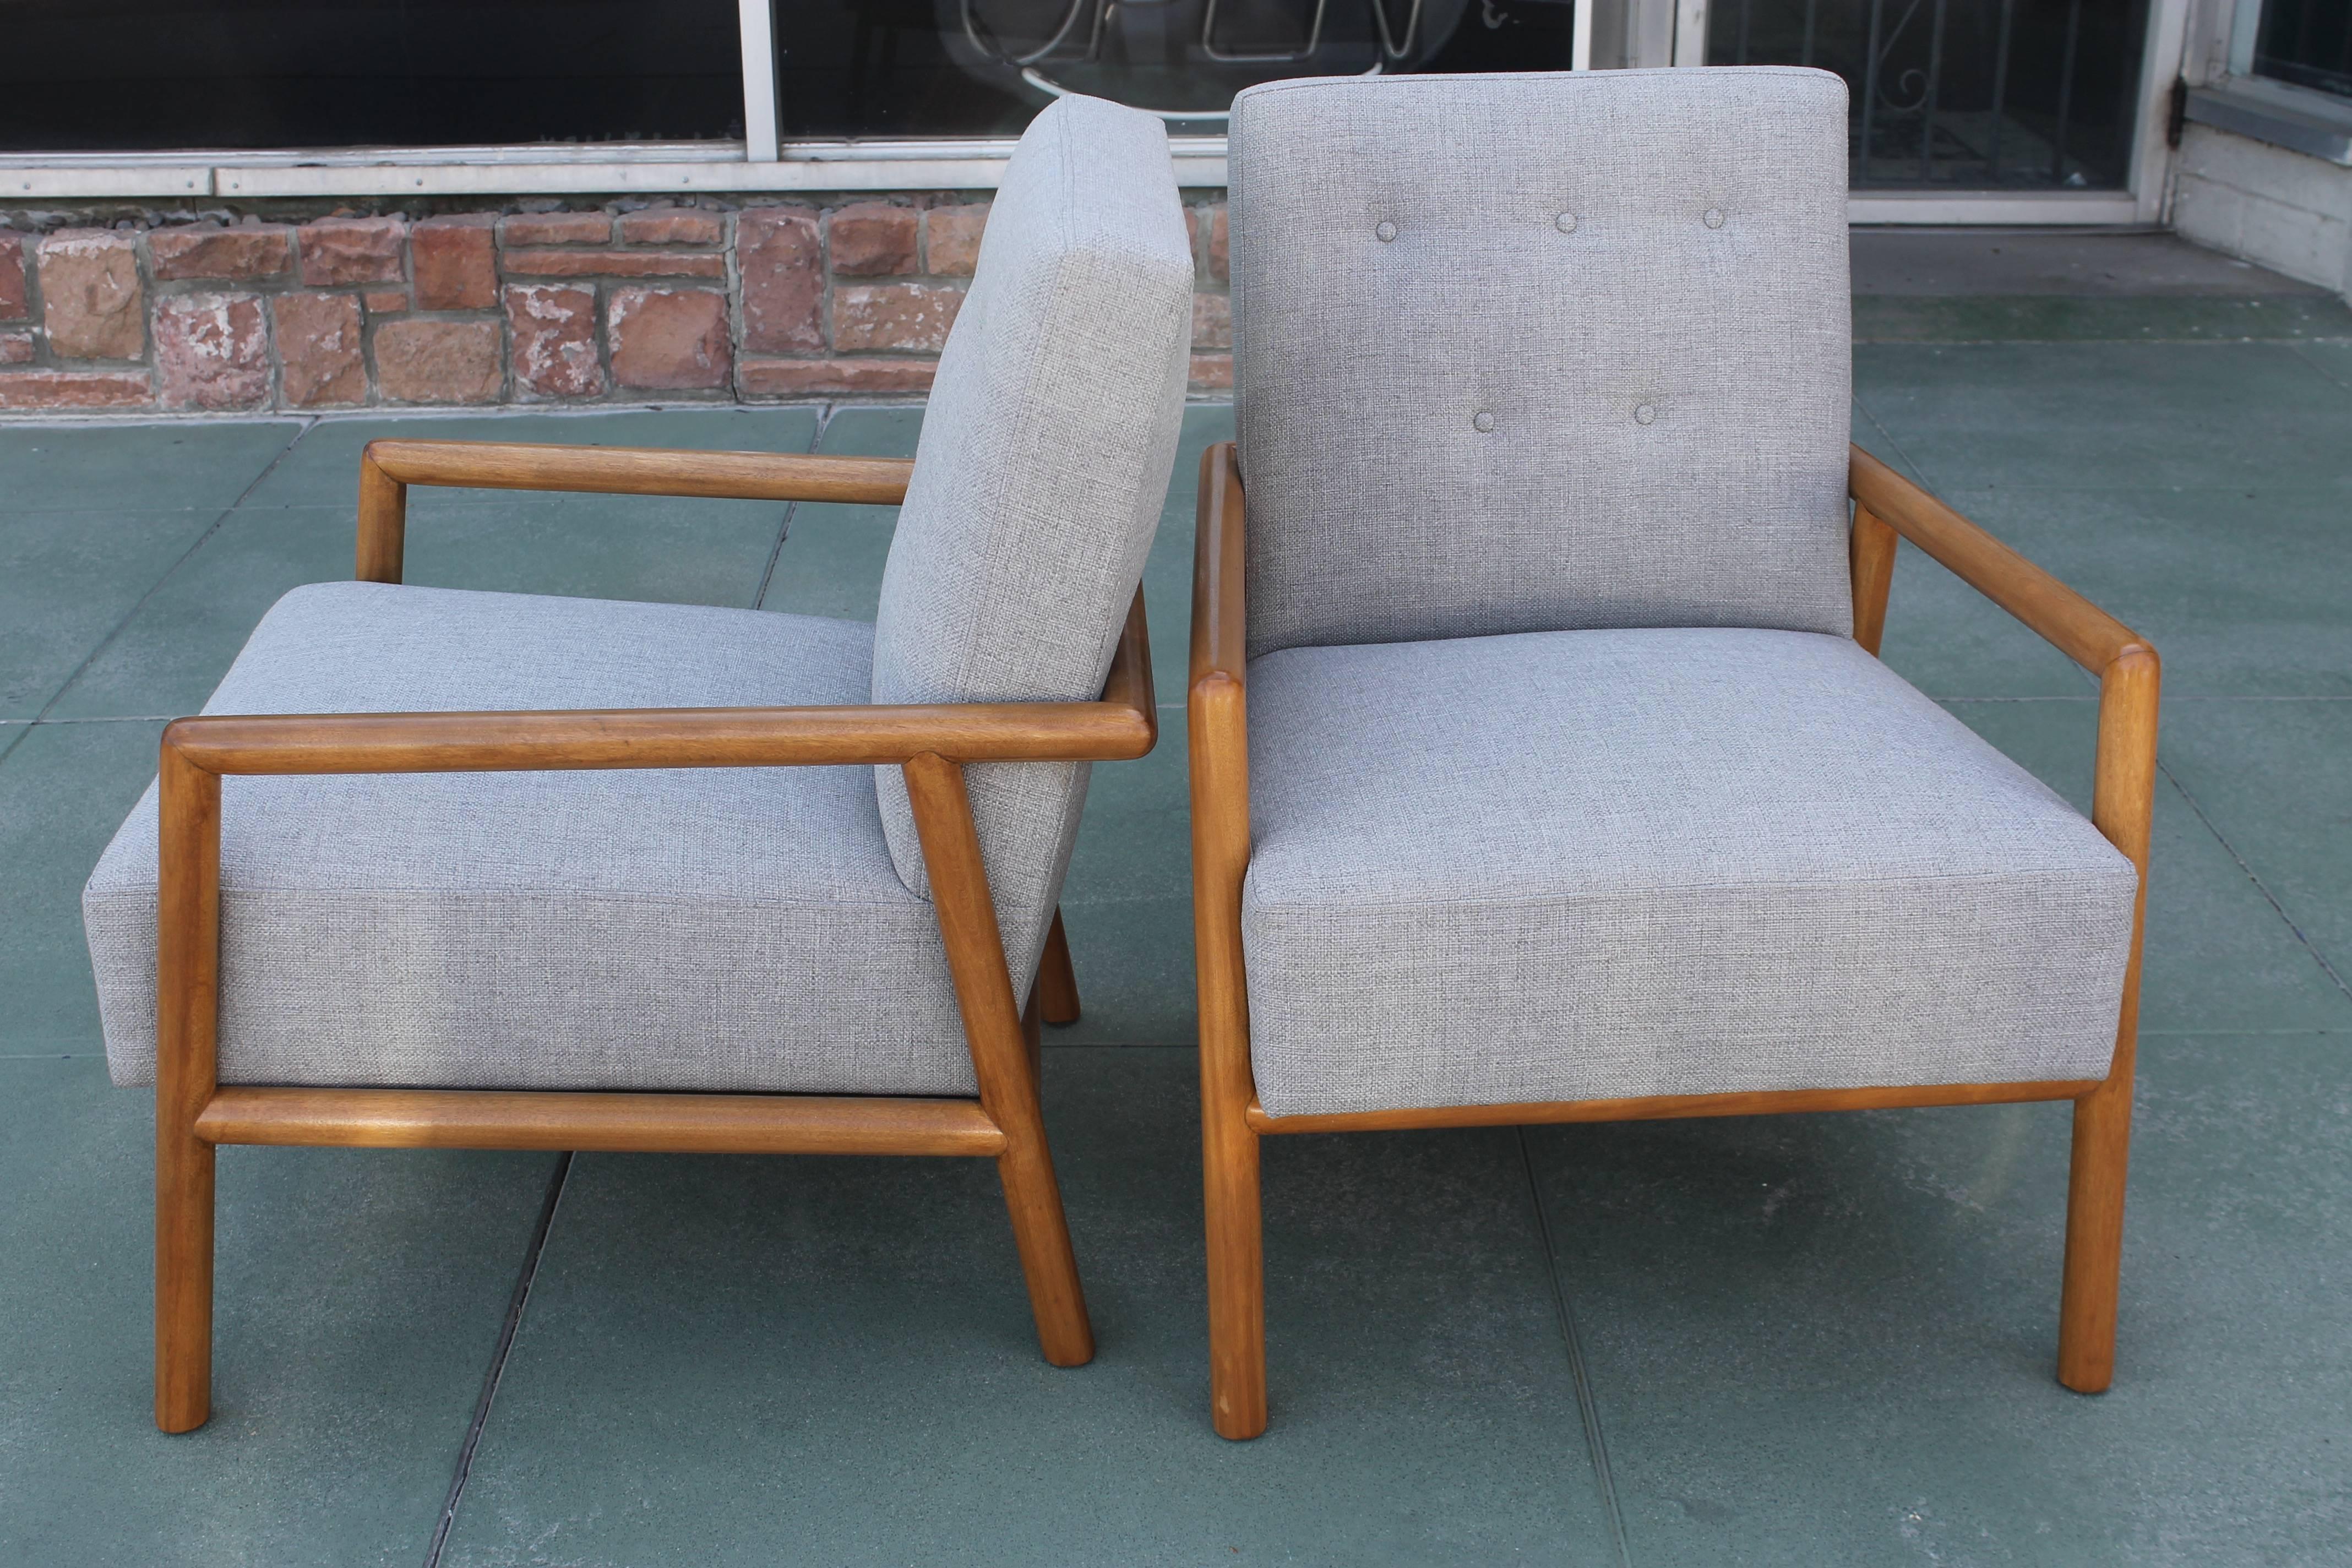 Pair of T. H. Robsjohn-Gibbings lounge chairs. These are the smaller versions. These chairs have been in one owners house since the late 1950s. They were featured on the cover of Interior Design magazine dated February, 1960. We had them